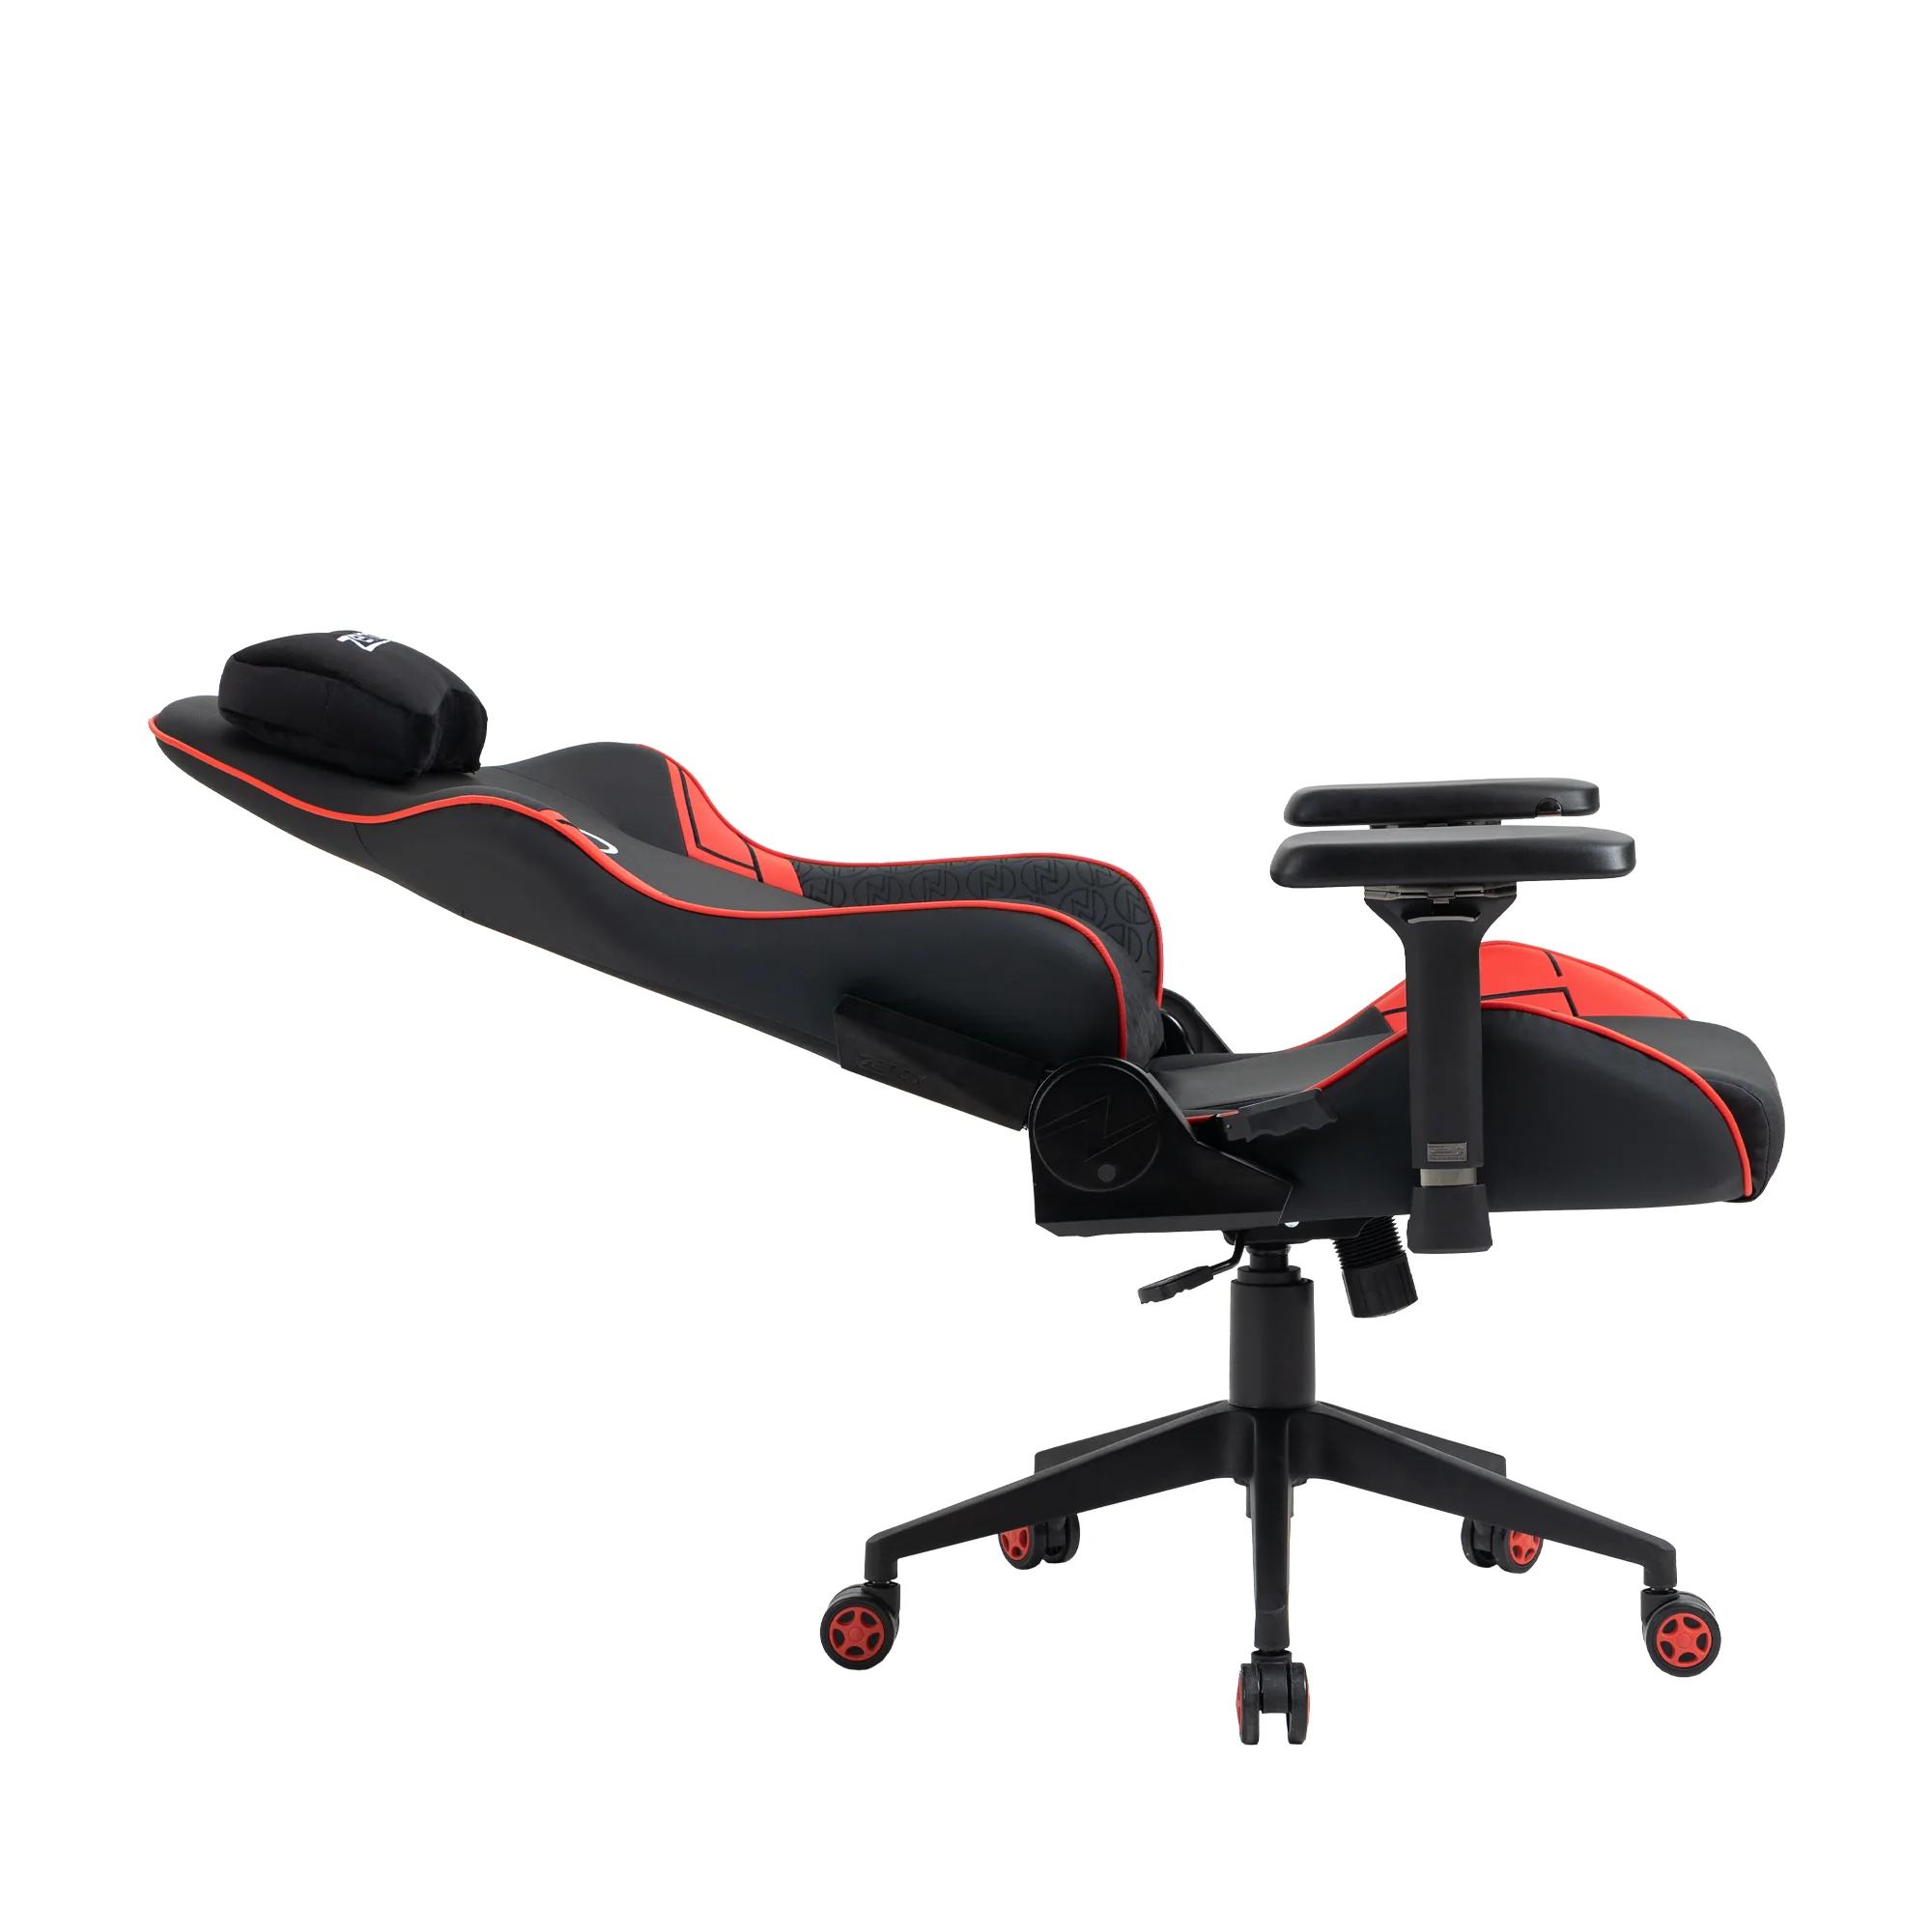 Zenox Saturn-MK2 Gaming Chair (Leather/Red)